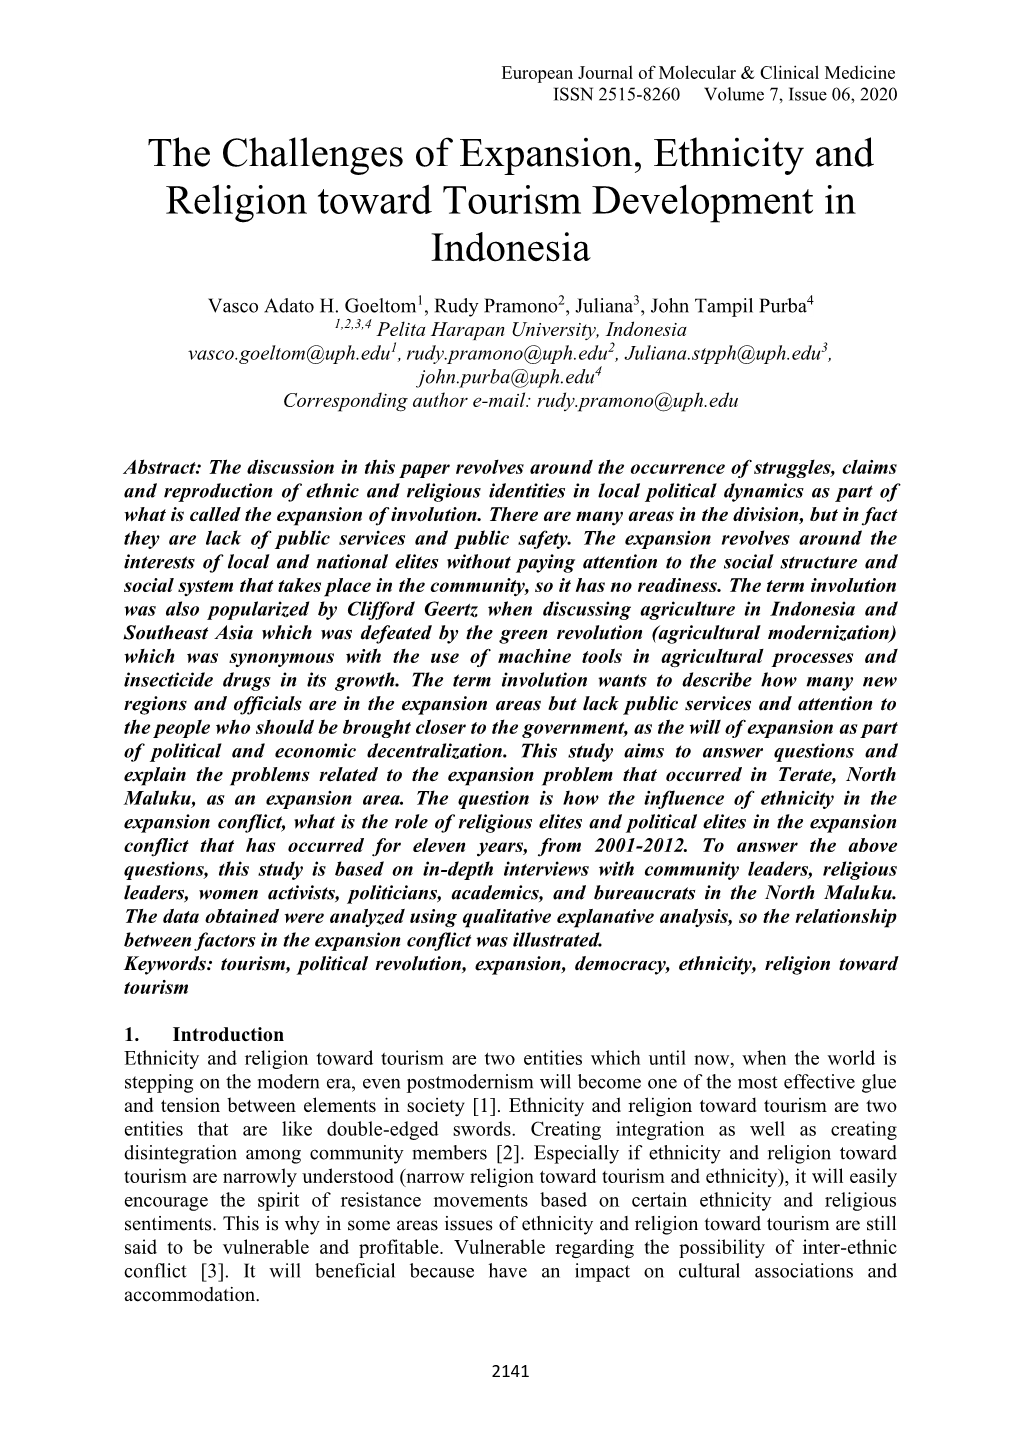 The Challenges of Expansion, Ethnicity and Religion Toward Tourism Development in Indonesia